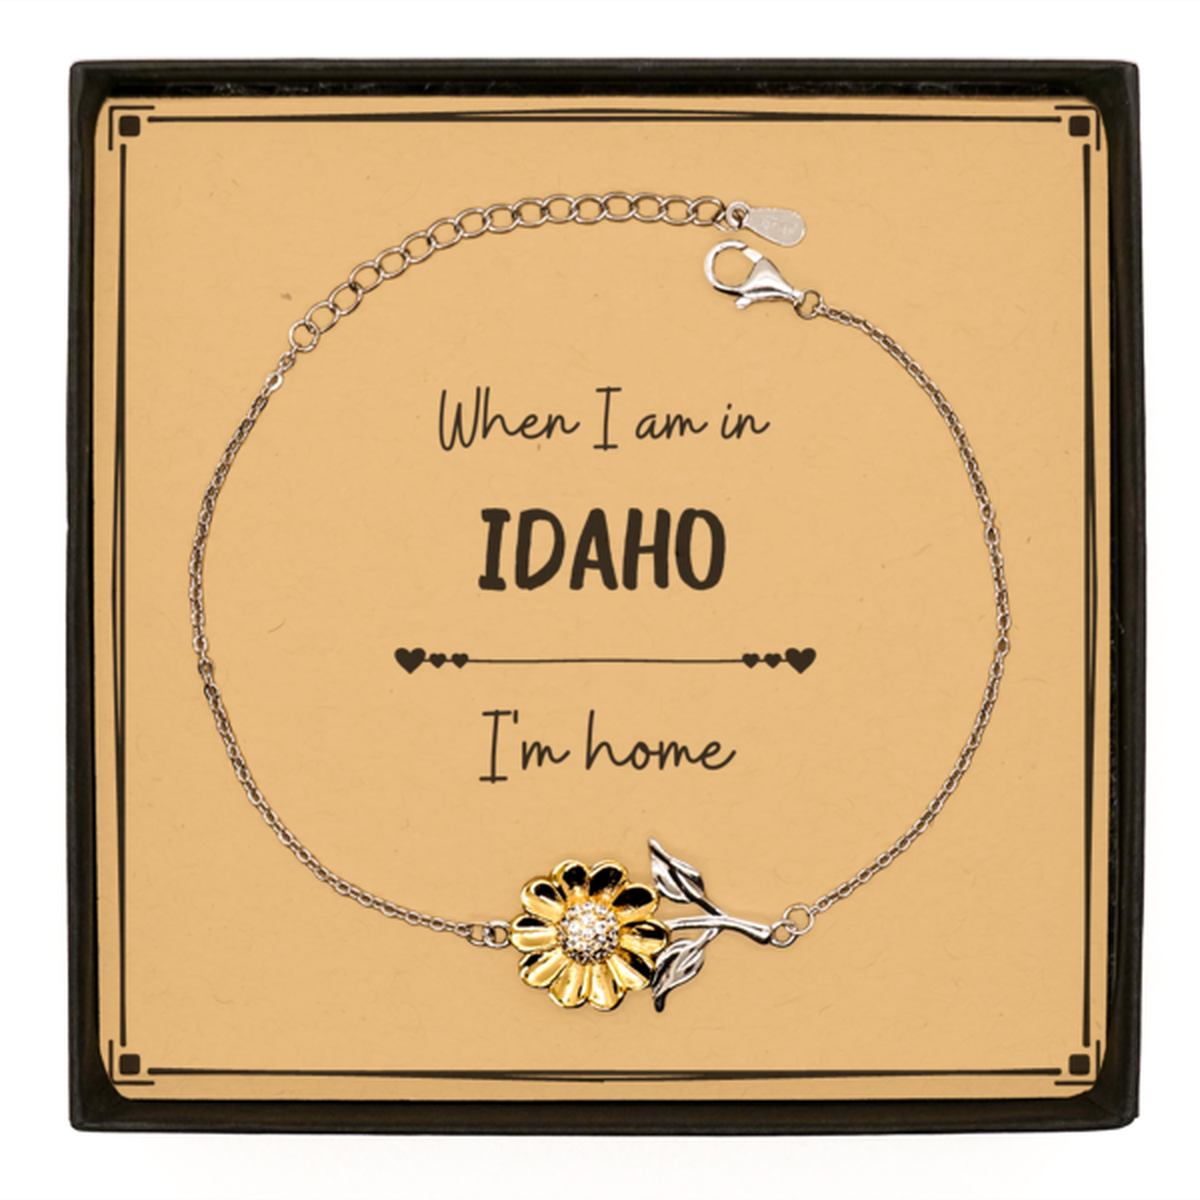 When I am in Idaho I'm home Sunflower Bracelet, Message Card Gifts For Idaho, State Idaho Birthday Gifts for Friends Coworker